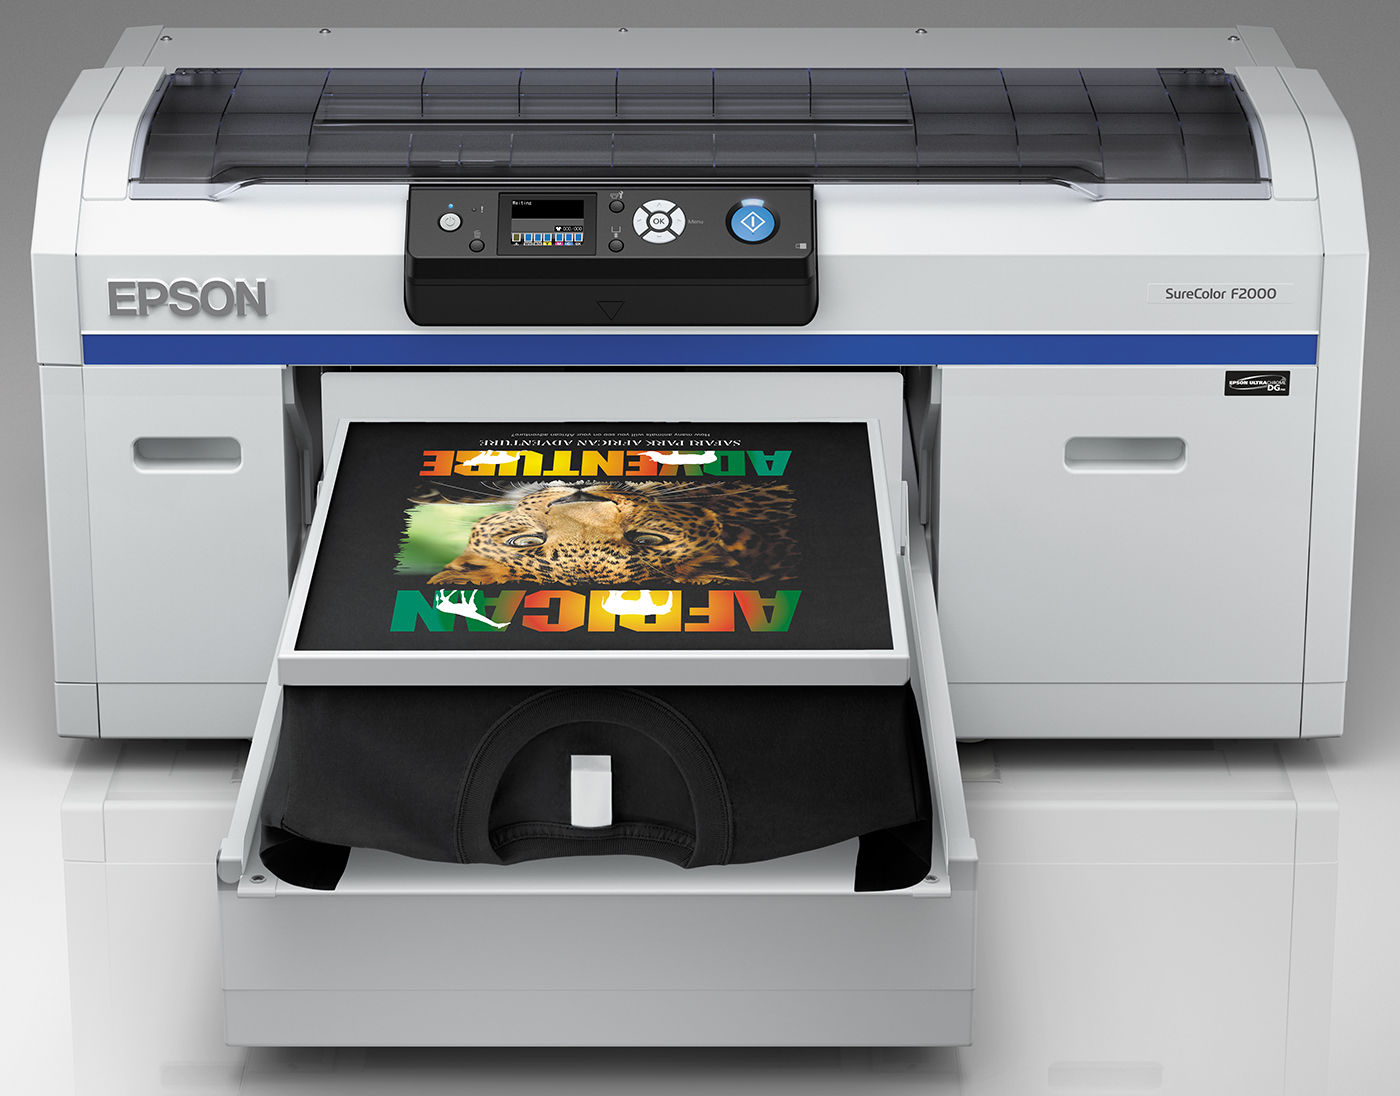 Epson SureColor F2000 large format printer printing on a black t-shirt